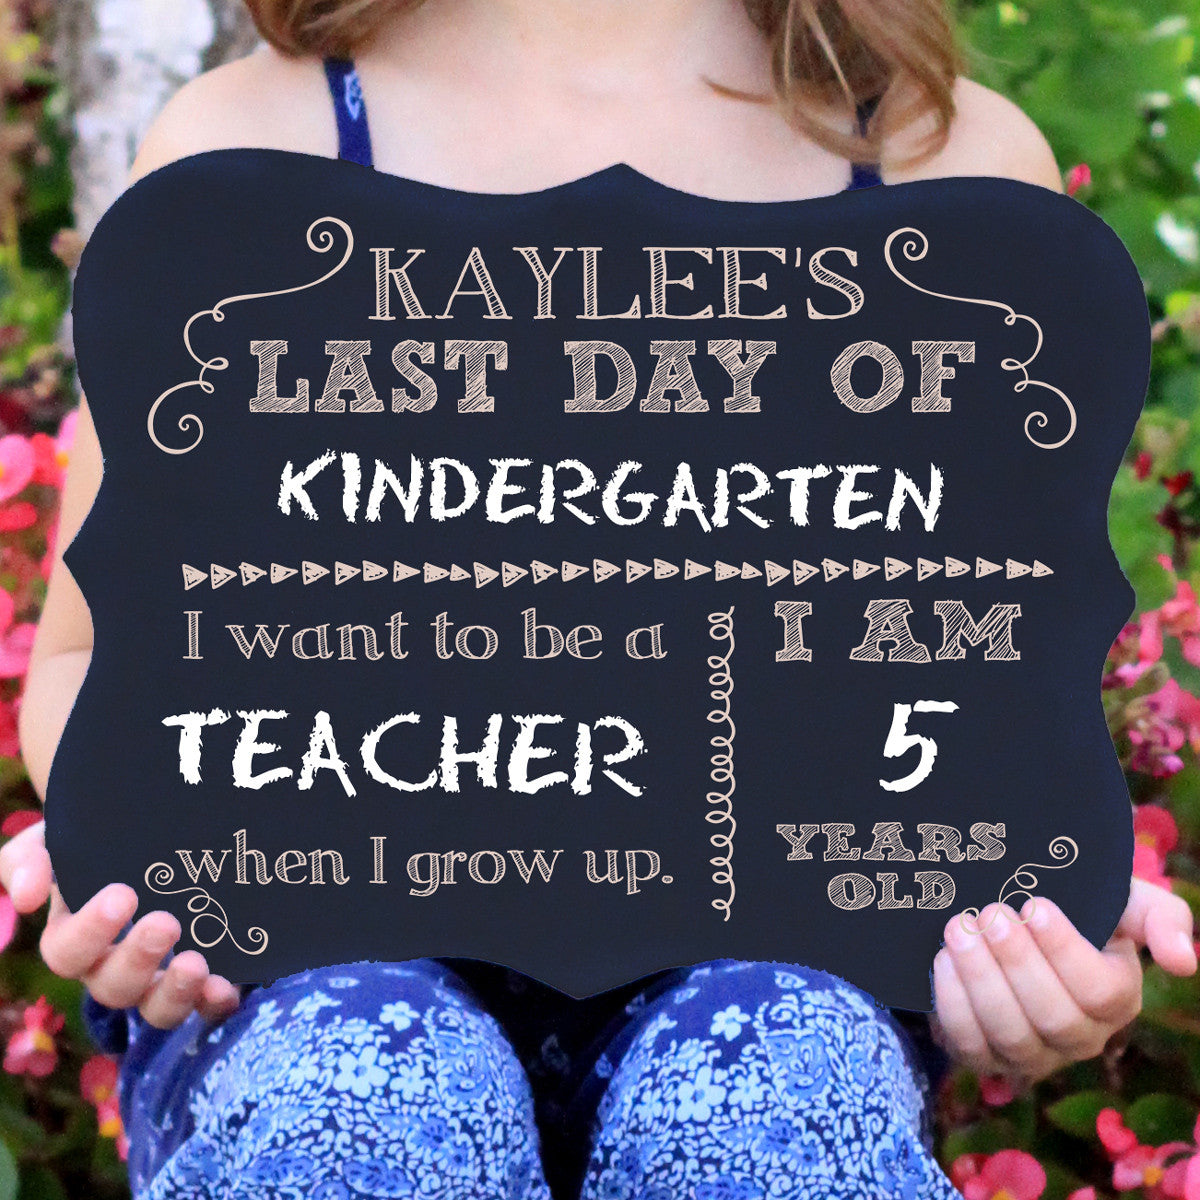 last-day-of-school-chalkboard-sign-kaylee-stamp-out